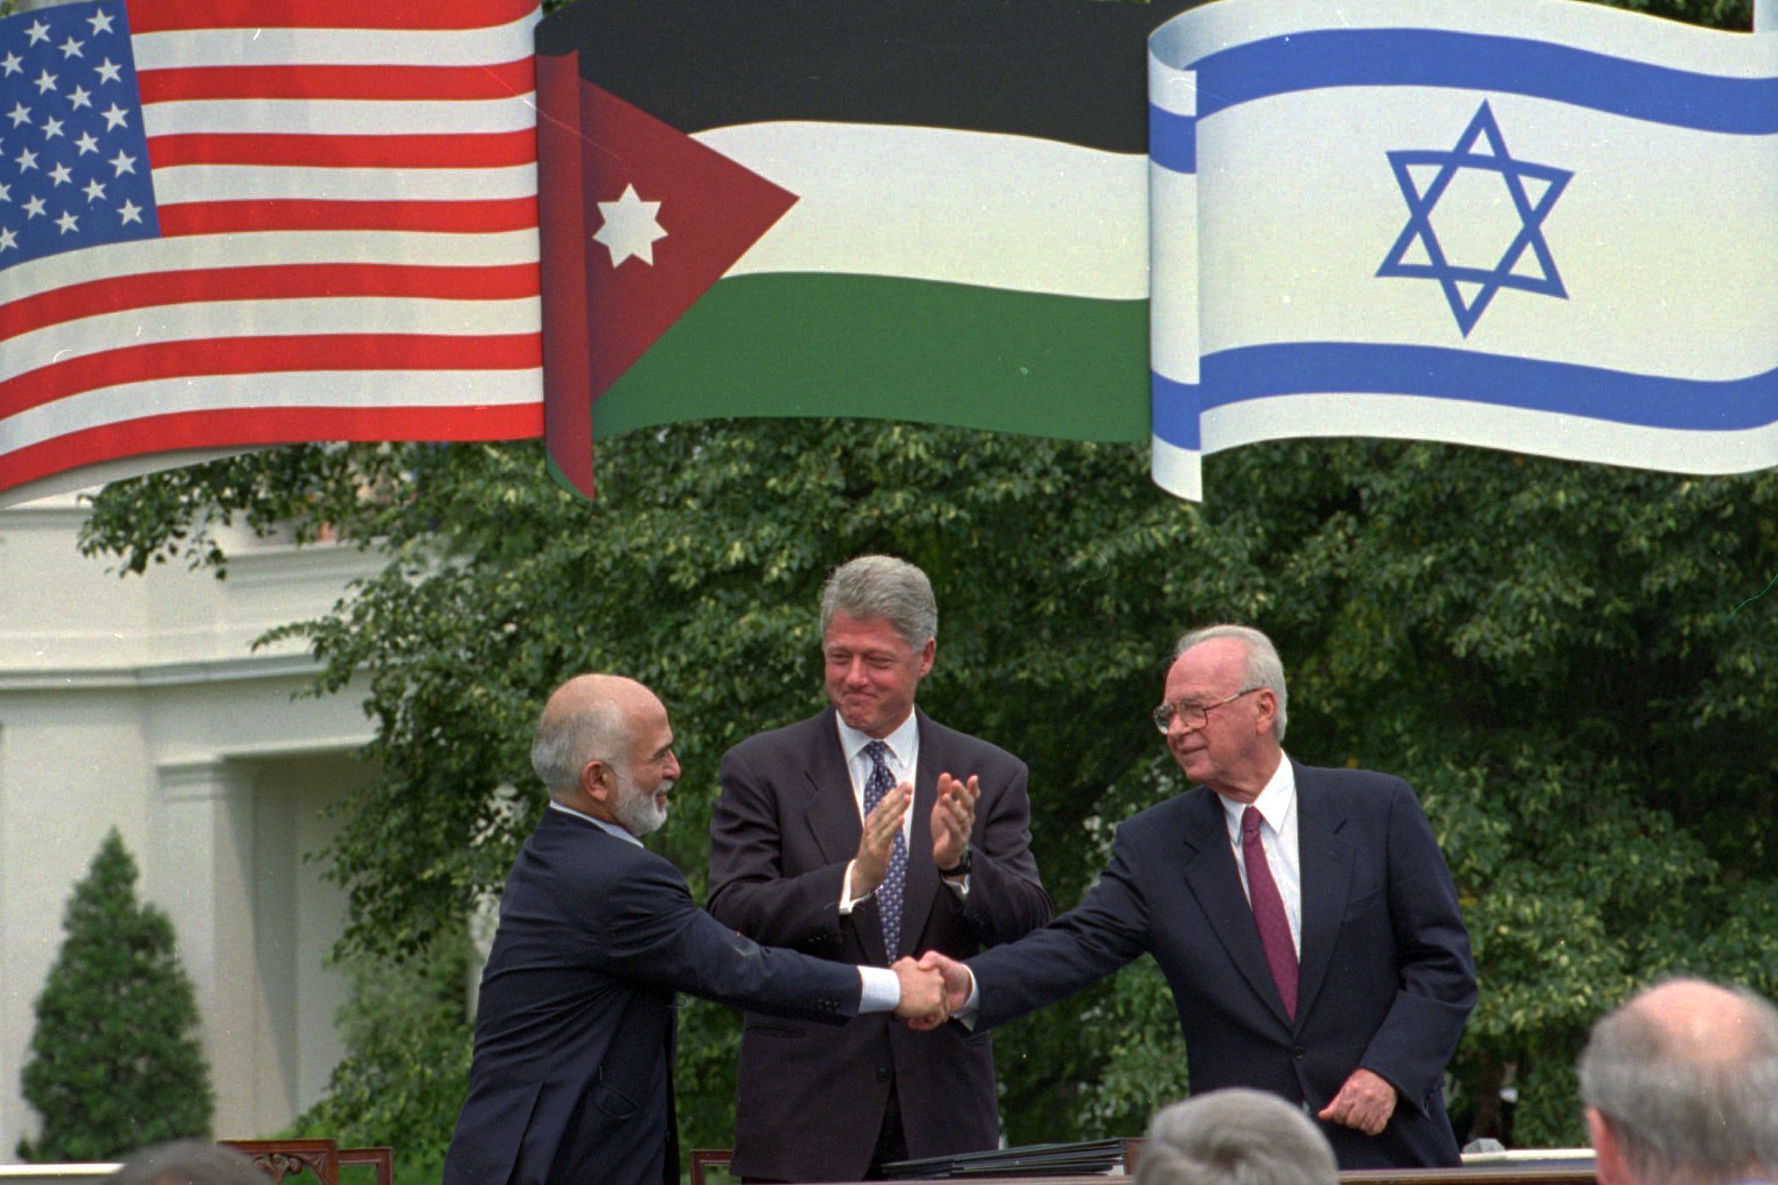 FILE- in this Monday, July 25, 1995 file photo U.S. President Bill Clinton applauds as King Hussein of Jordan, left, and Israeli Prime Minister Yitzhak Rabin, right, shake hands after signing a declaration in Washington, D.C., ending 46-years of hostilities between the two countries. A diplomatic standoff between Israel and Jordan over a deadly shooting at Israel's embassy in the kingdom once again tests the strategically critical yet turbulent ties forged in a 1994 peace treaty.(AP Photo/Greg Gibson, File)